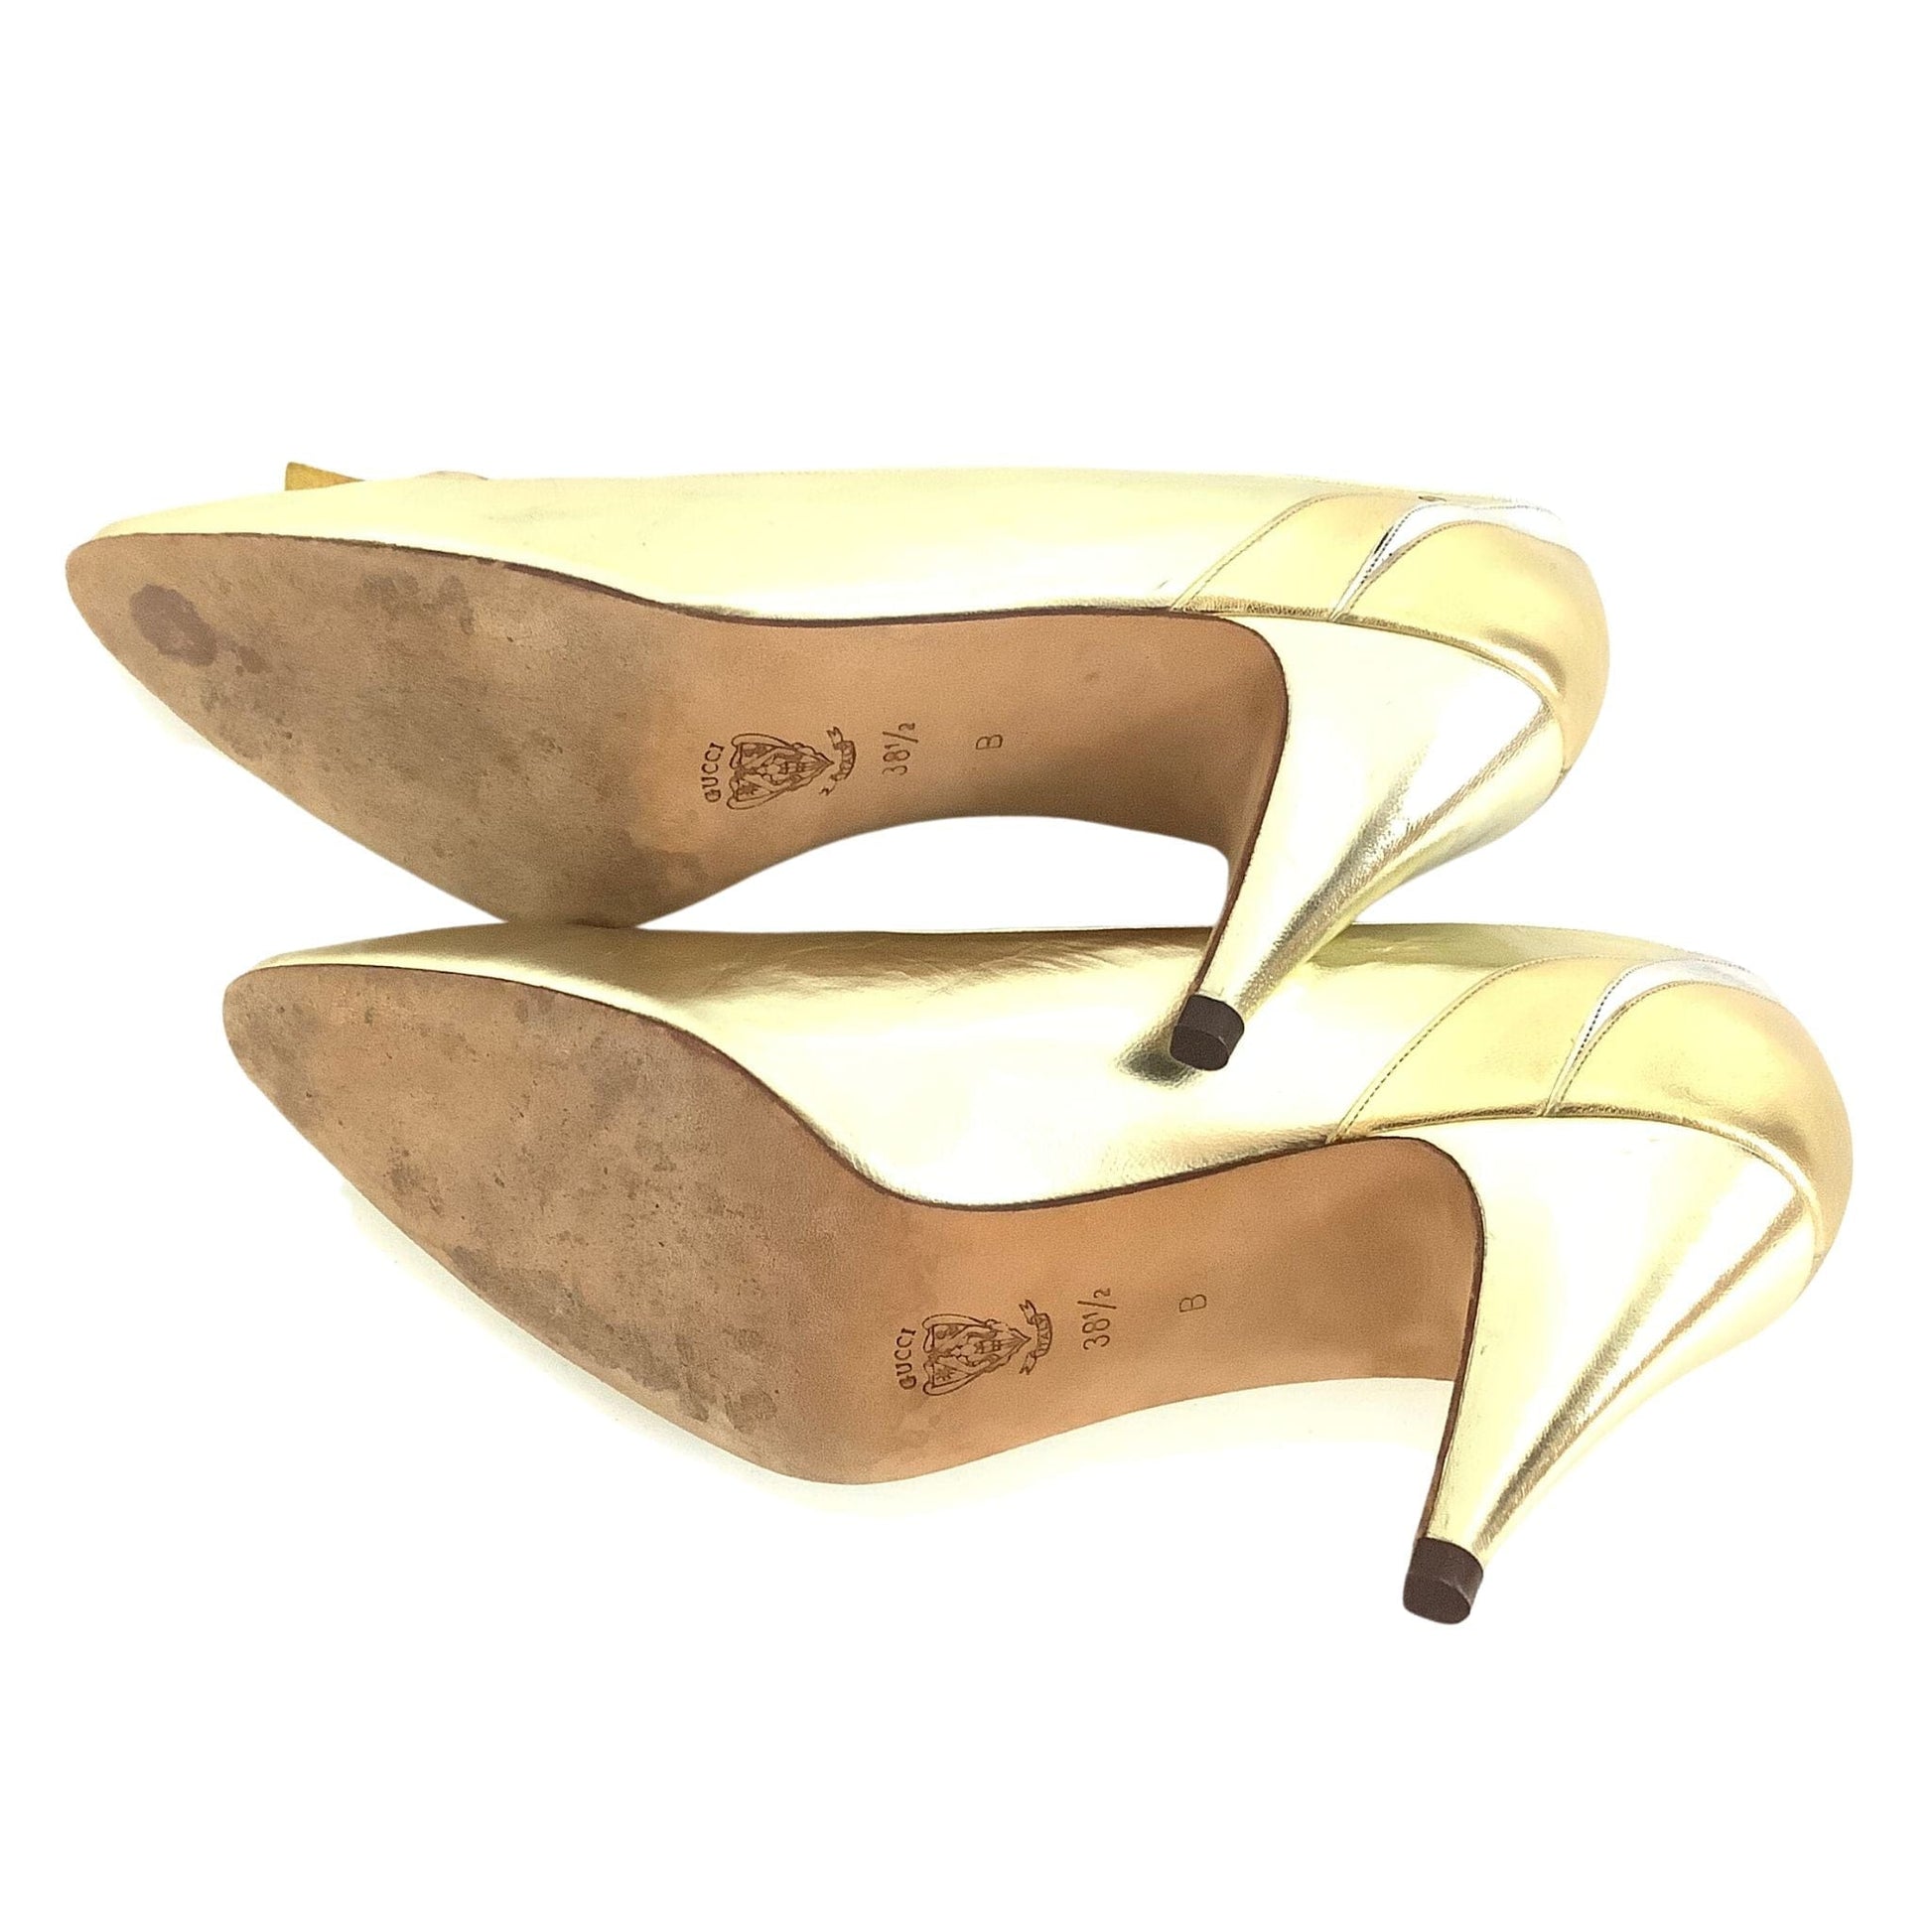 Vintage Gucci Gold Heels 8.5 / Gold / Classic